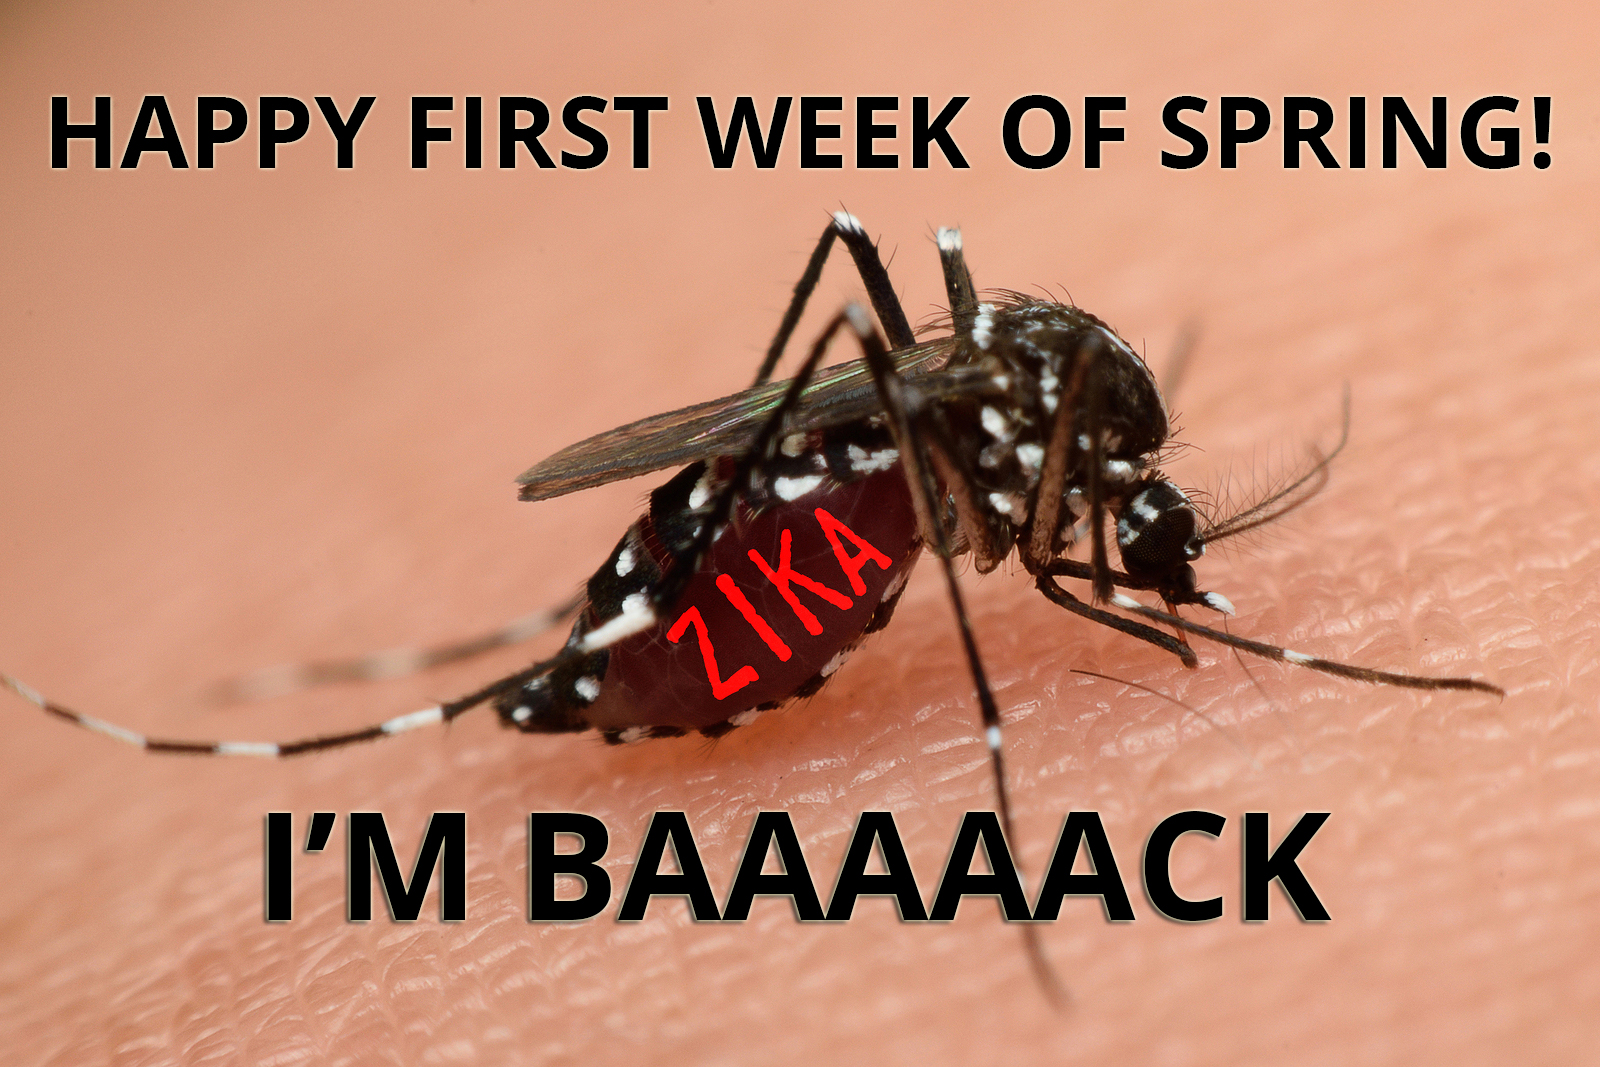 Spring is Here & So Are Mosquitoes! Here’s How You Can Prevent Mosquito Bites & Diseases Like Zika